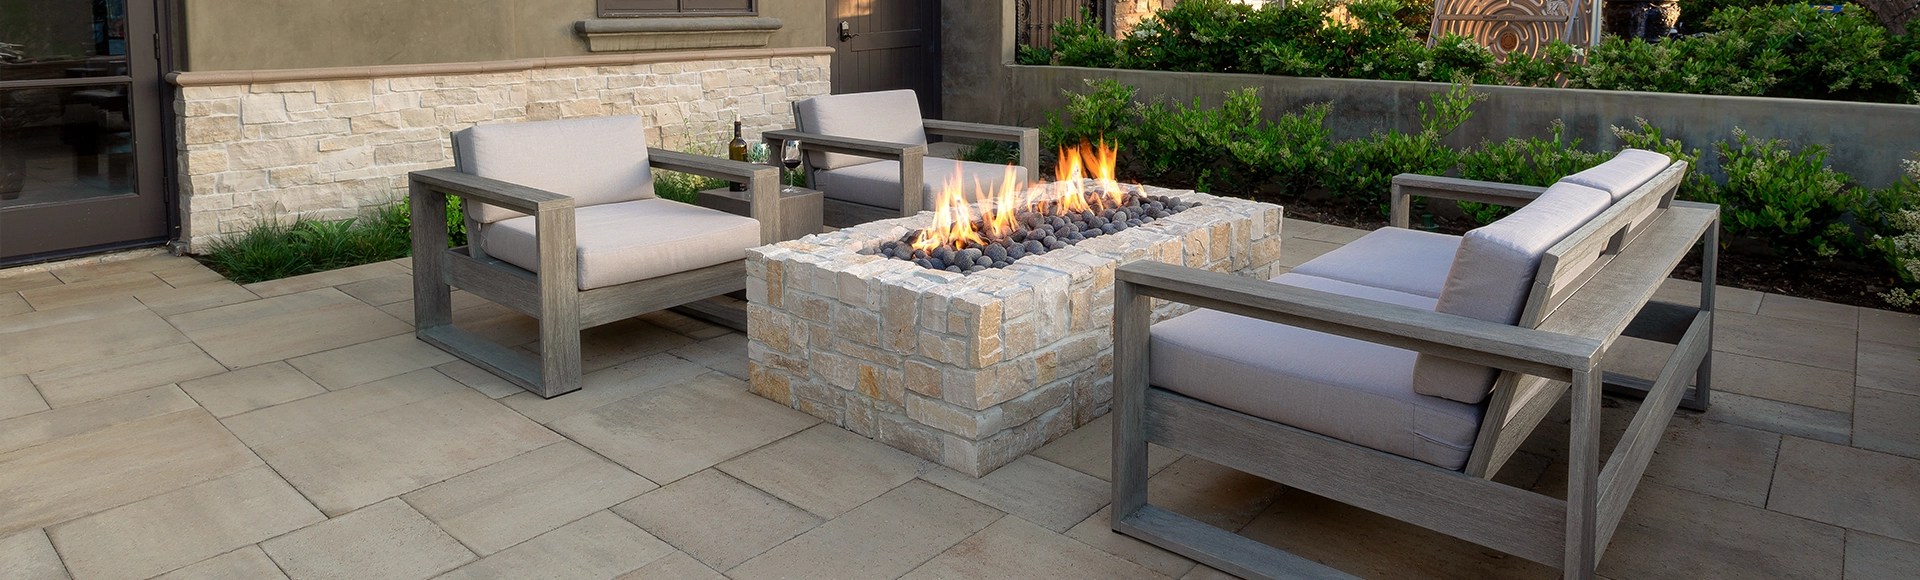 Outdoor paving stone walkway with turf and paving stone fire pit. 